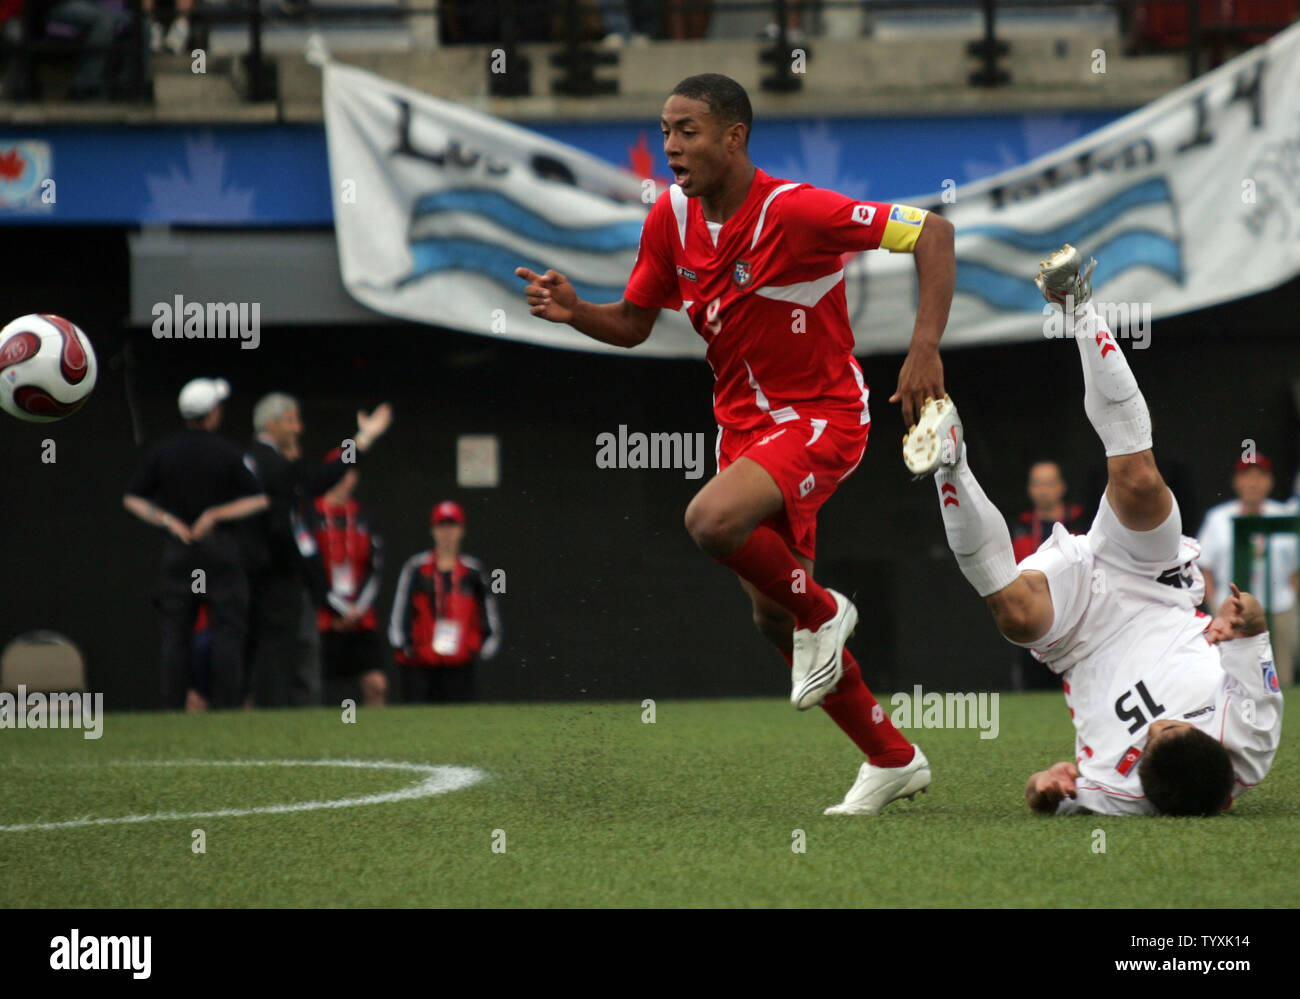 Panama's forward Gabriel Torres (red) pursues the ball after scrimmaging with North Korean defender Yong Il Yun (15) during the second half of the opening FIFA Under-20 World Cup match at Frank Clair Stadium in Ottawa, Canada on June 30, 2007. The match ended in a scoreless tie. (UPI Photo/Grace Chiu). Stock Photo